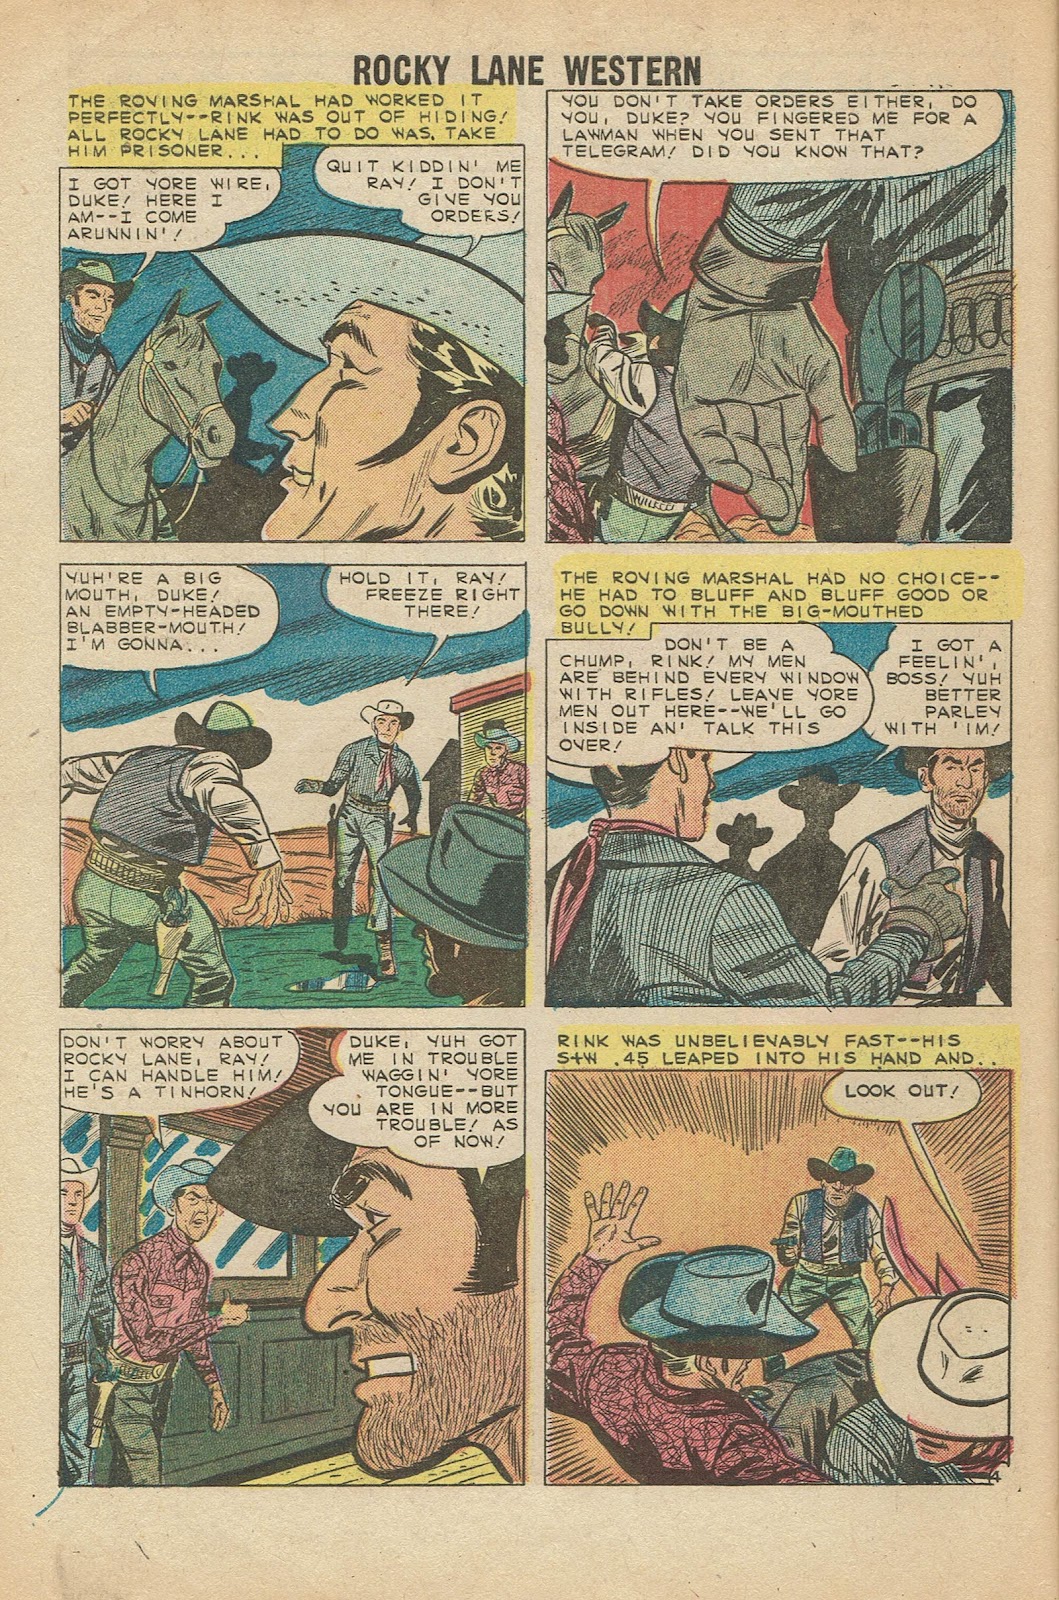 Rocky Lane Western (1954) issue 85 - Page 32